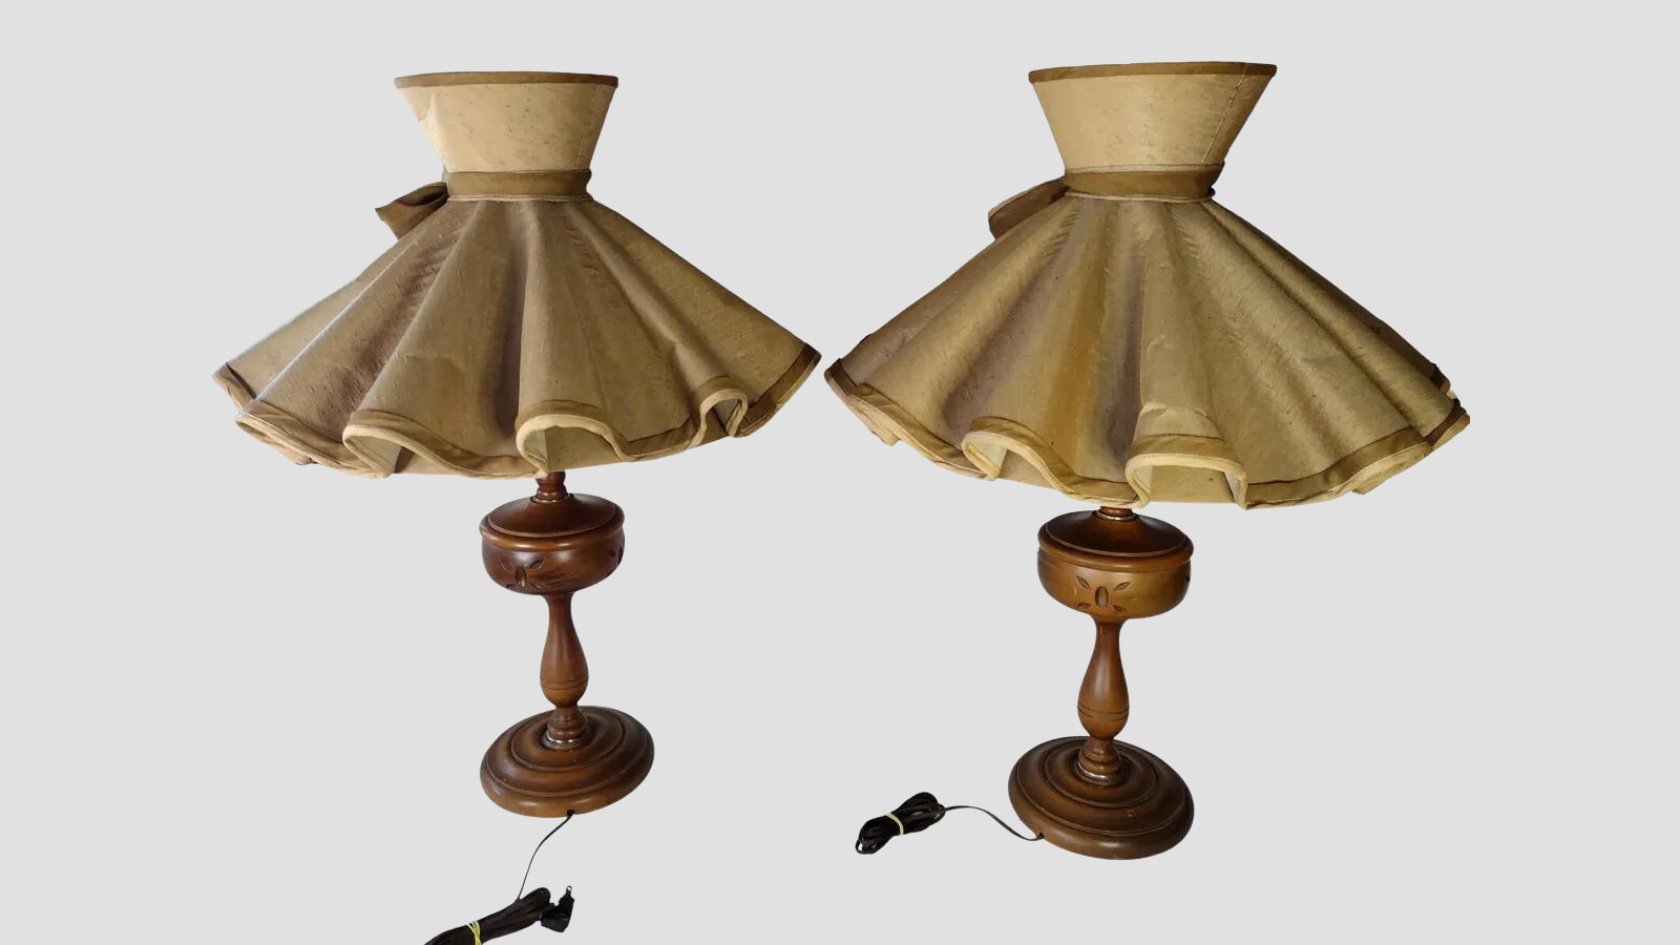 How To Make Vintage Pair Of Early American Colonial Style Table Lamps With Ruffled Fabric Shade 1699281573 